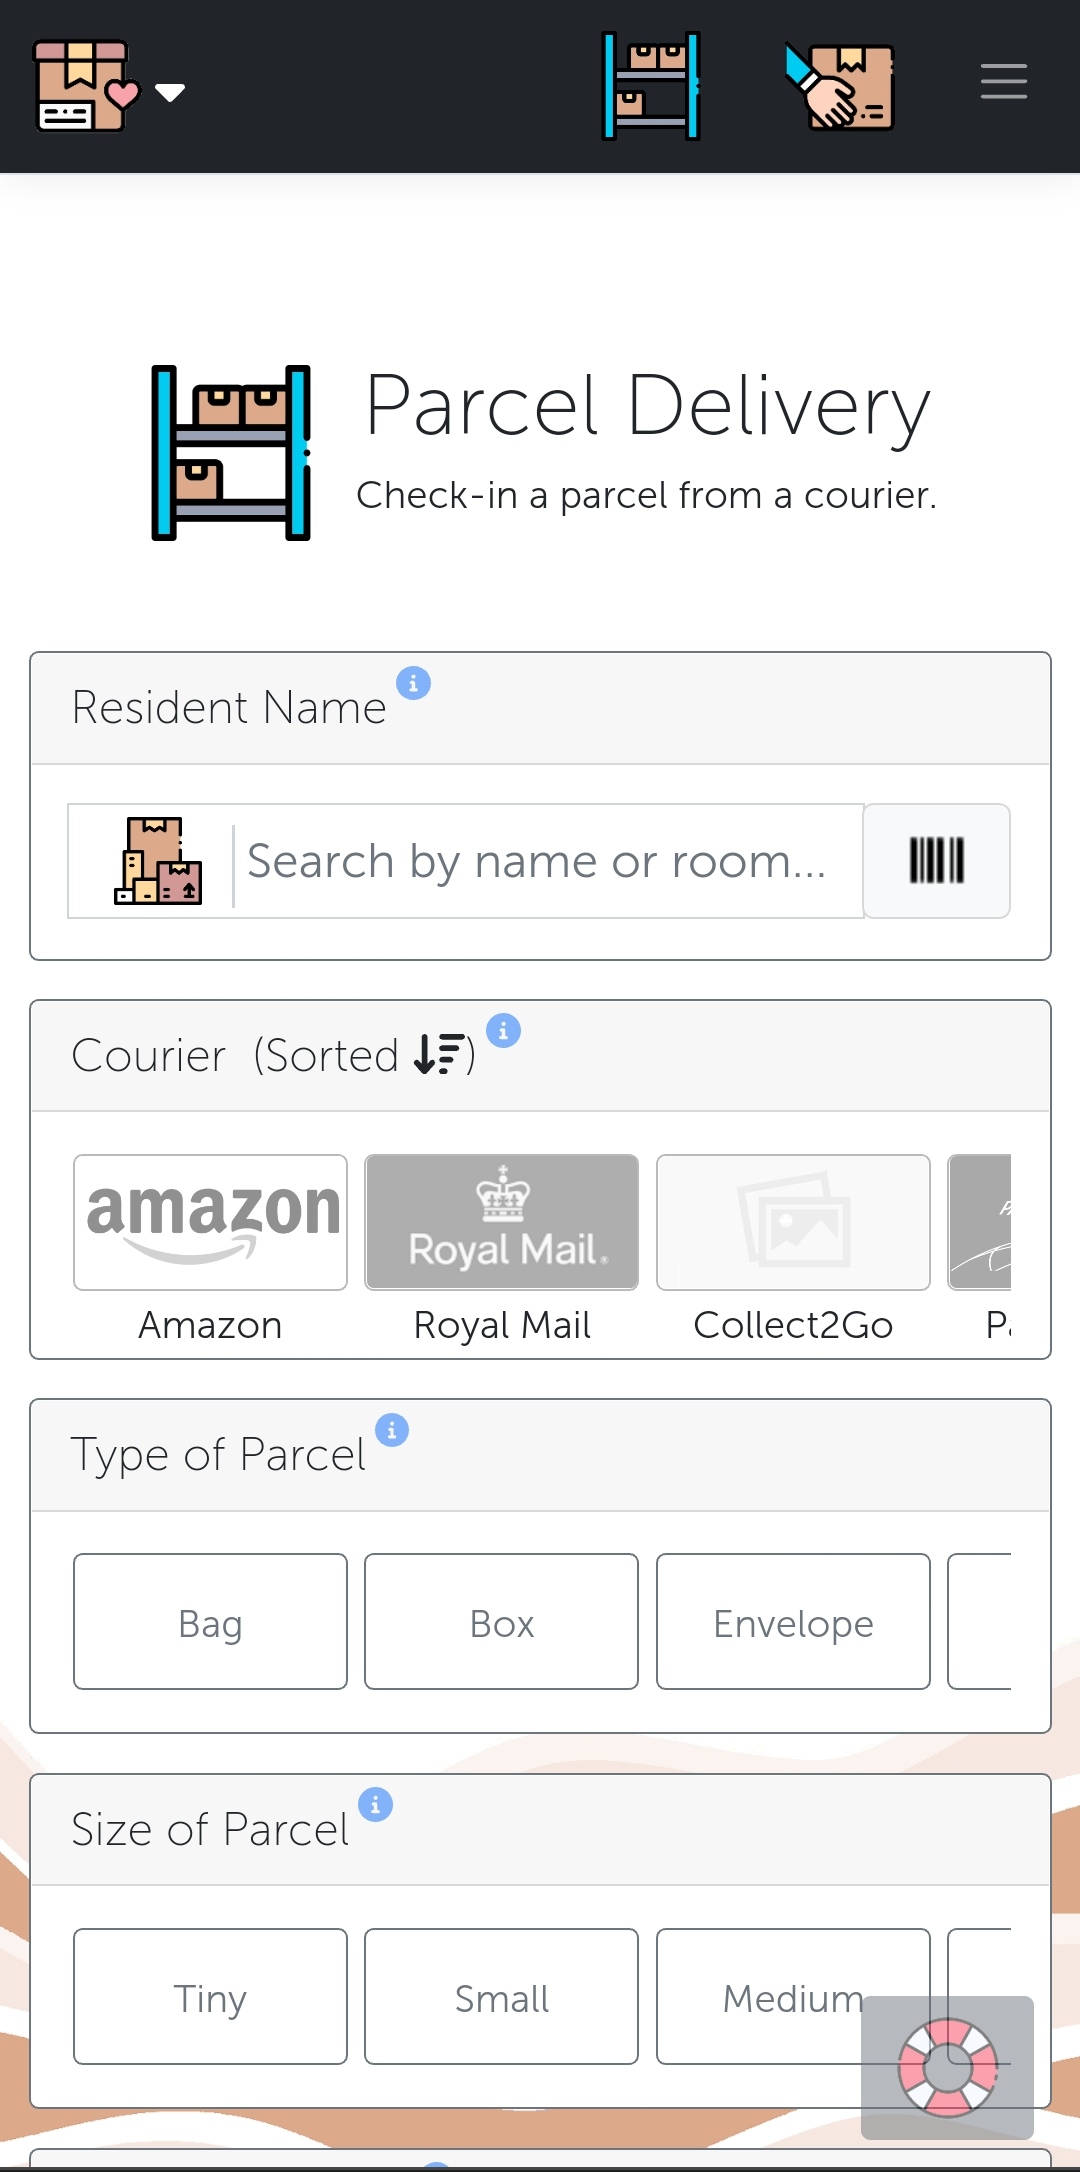 Choose to type the name to search your database or simply scan the parcel's label. Choose to collect further details on the parcel & courier to help you find the parcel on collection.